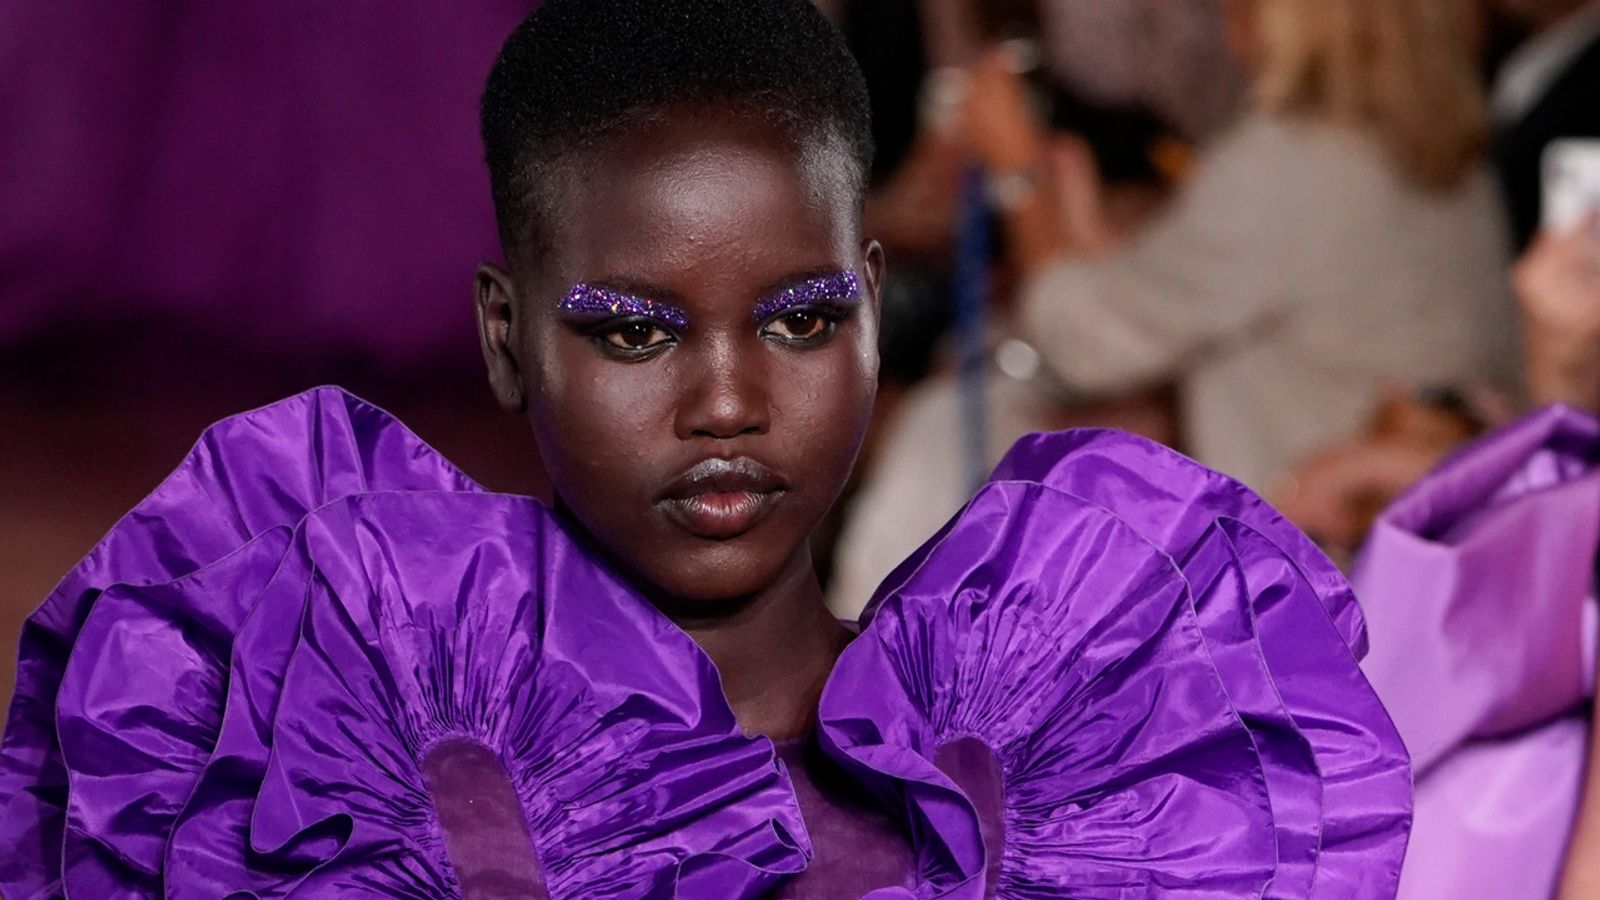 Model Adut Akech accuses magazine of racism after photo mix-up | World ...